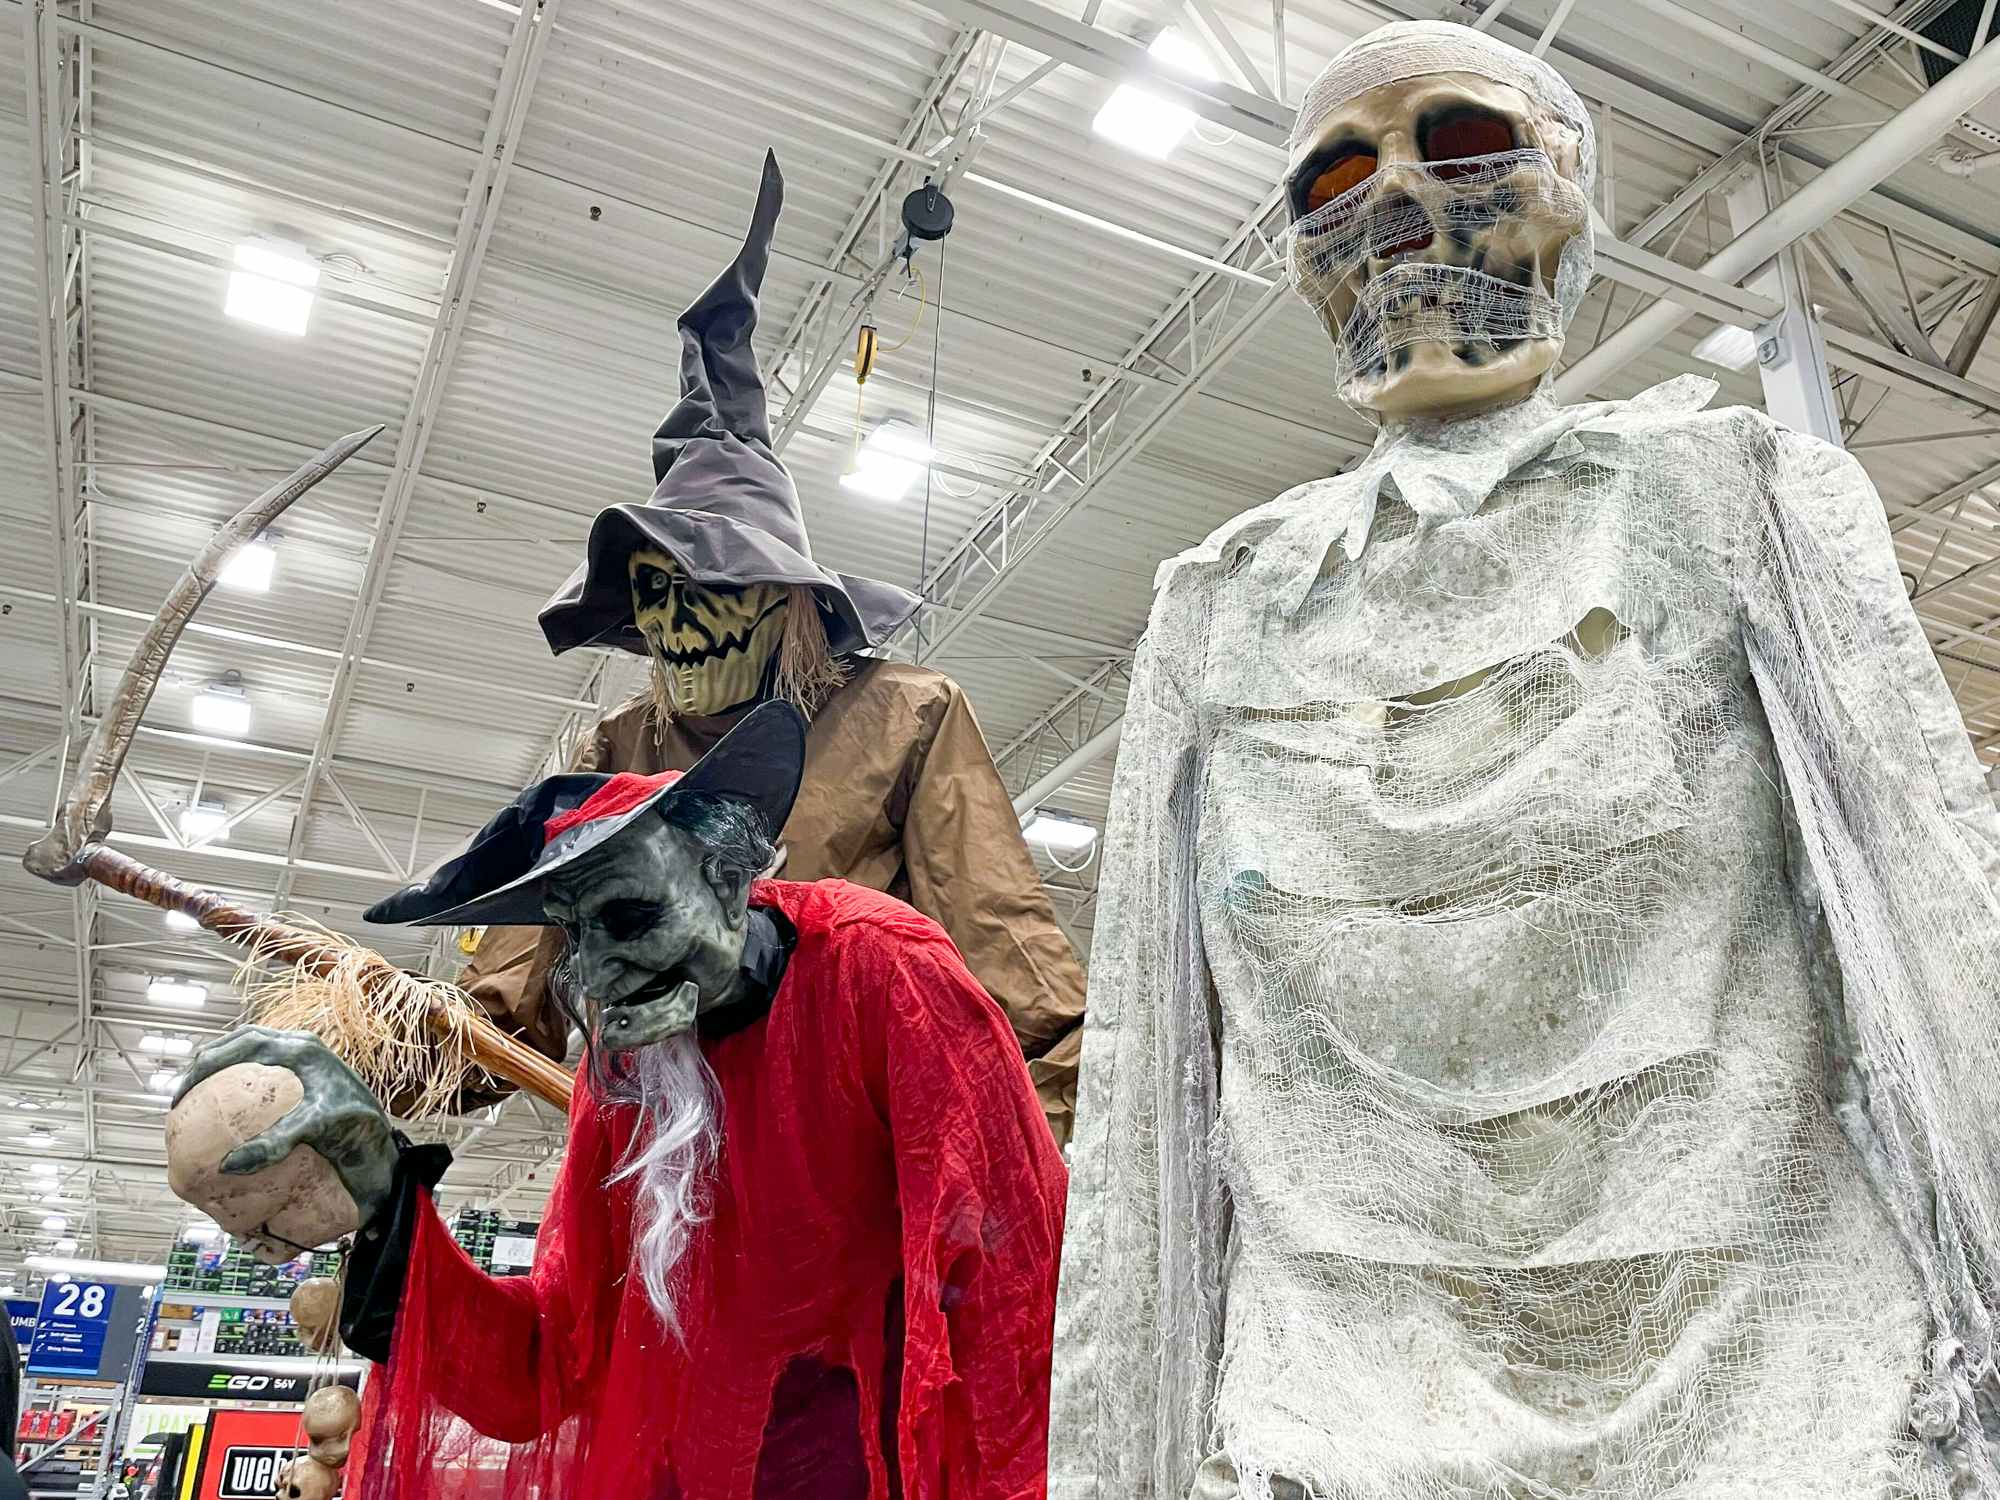 Large scary Halloween decorations on display at Lowe's